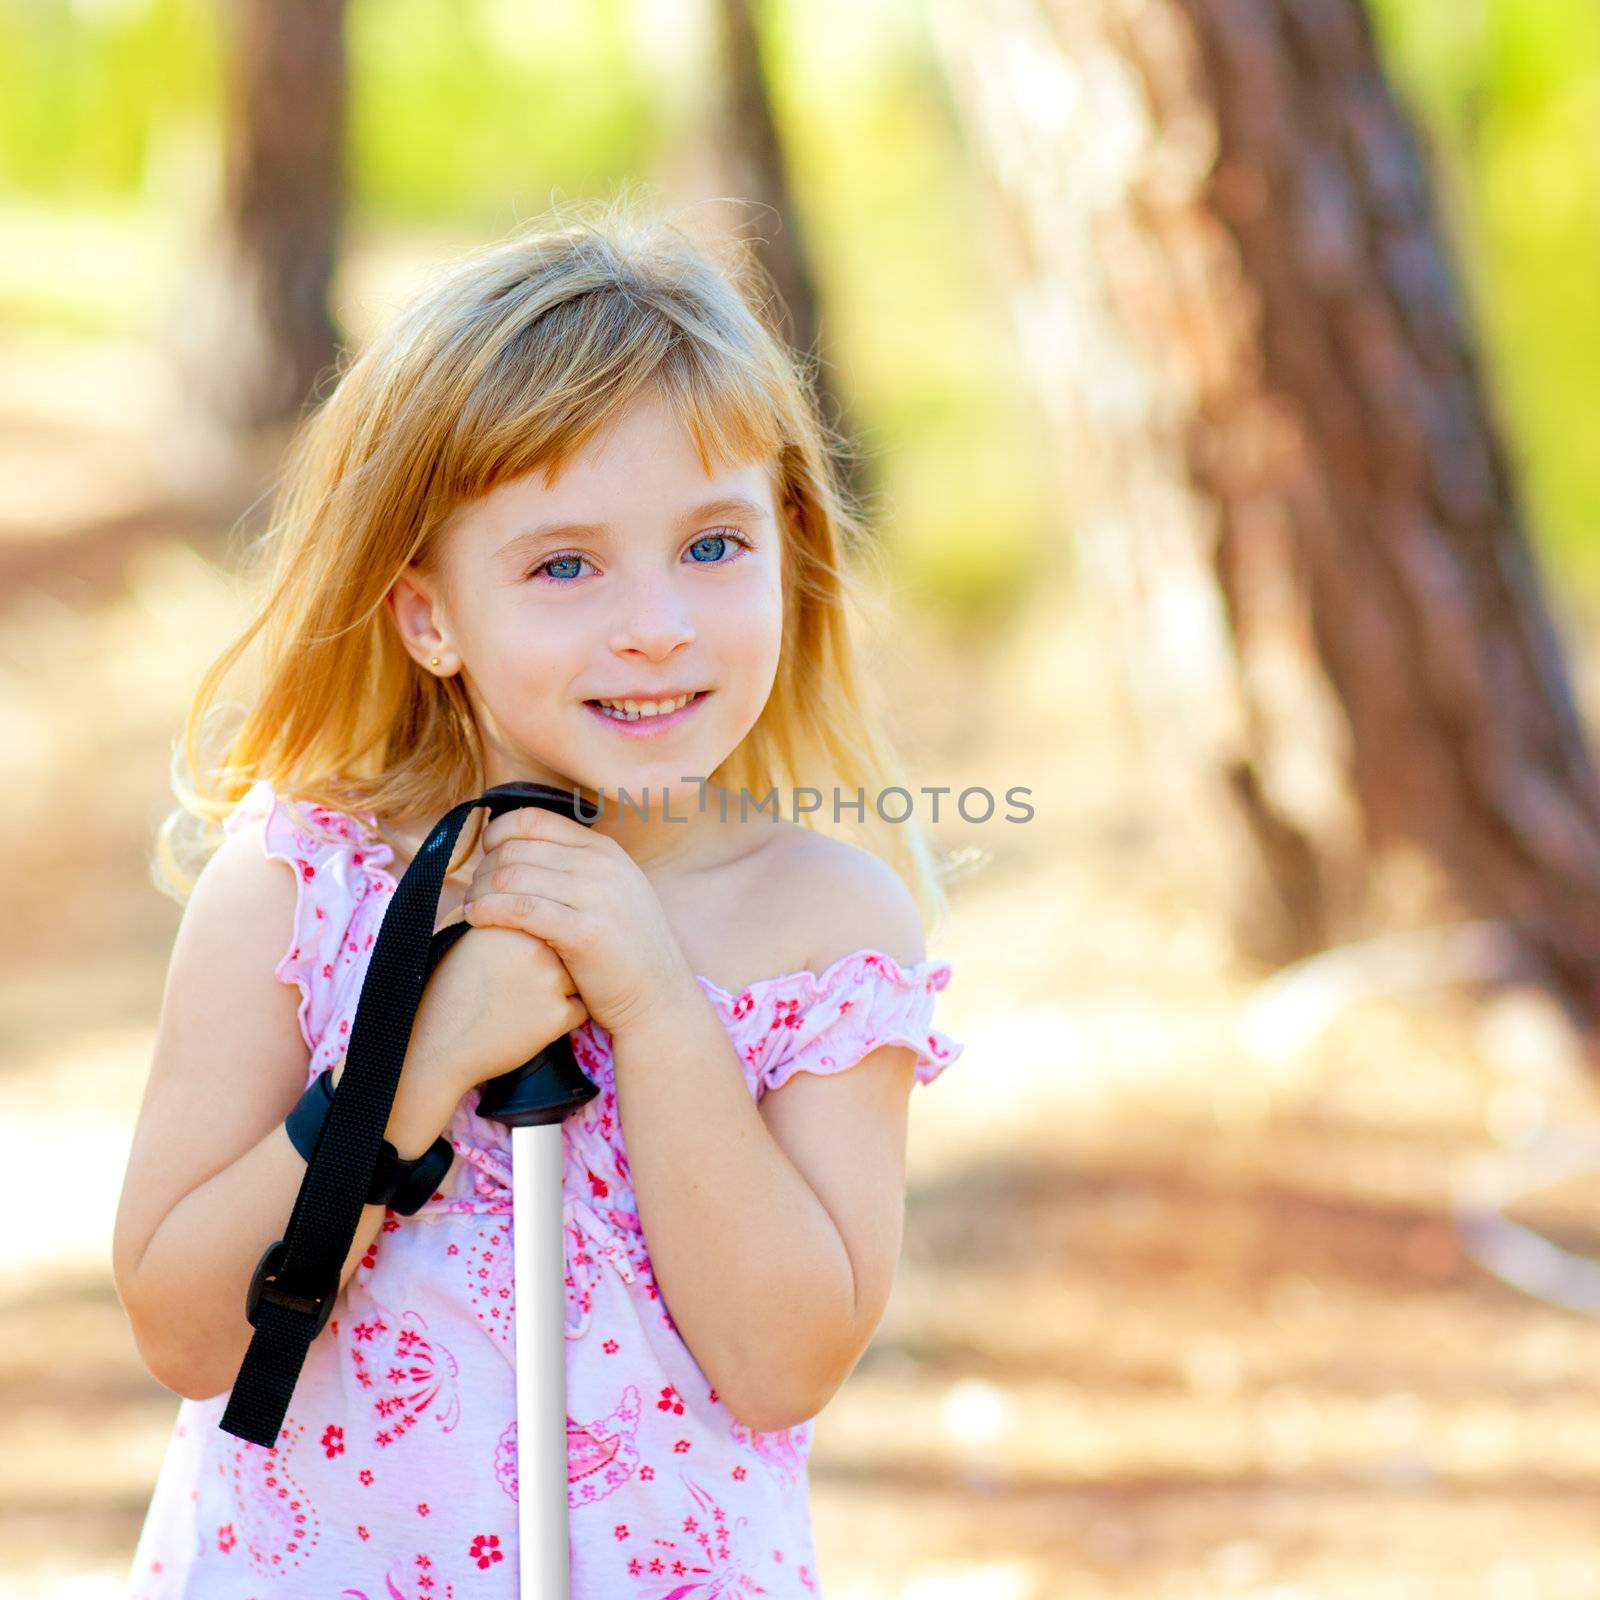 Beautiful kid girl in park forest smiling by lunamarina